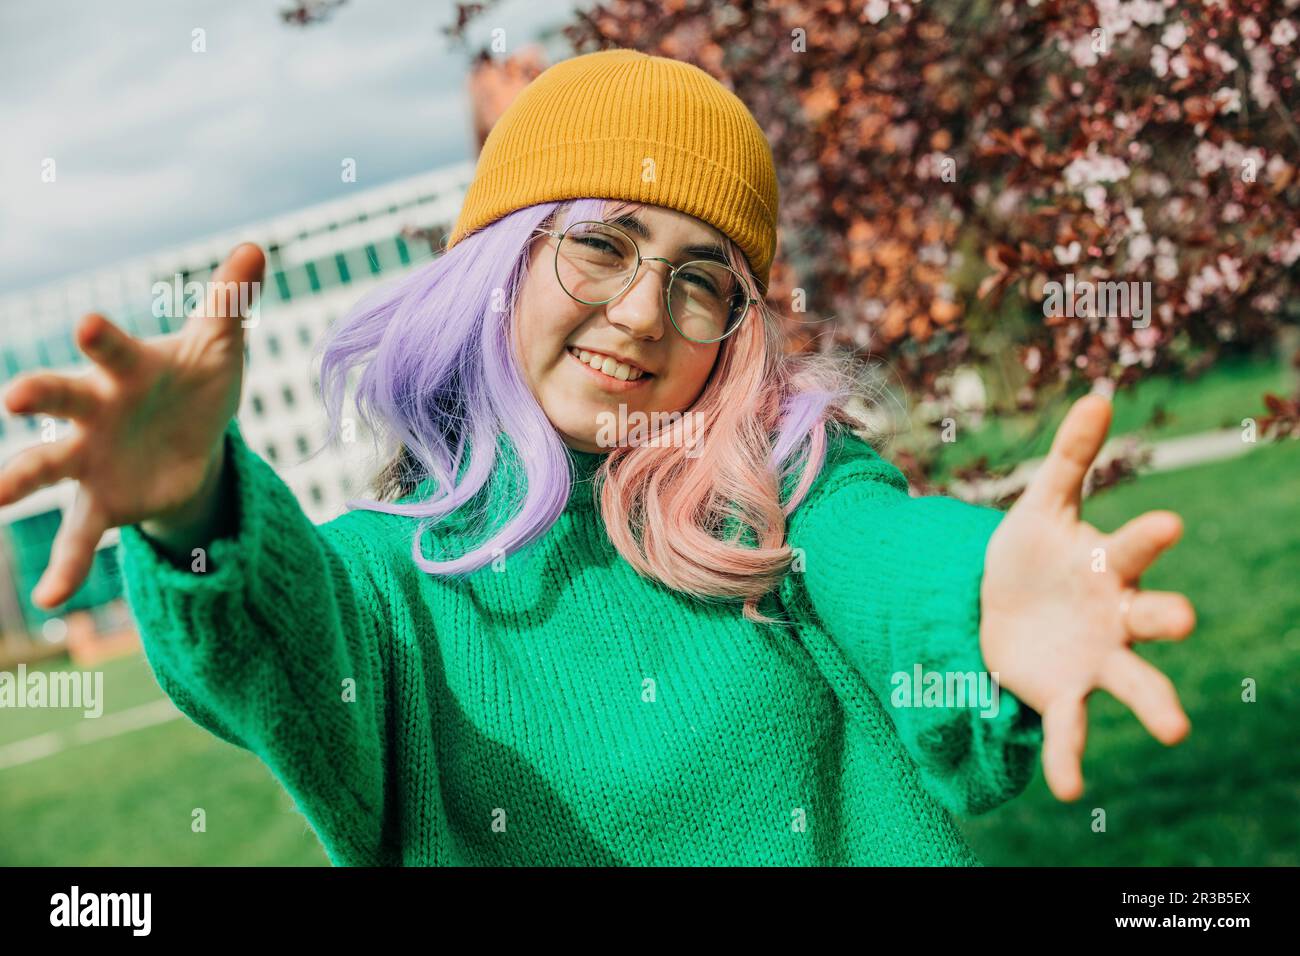 Smiling teenage girl with knit hat gesturing at park Stock Photo